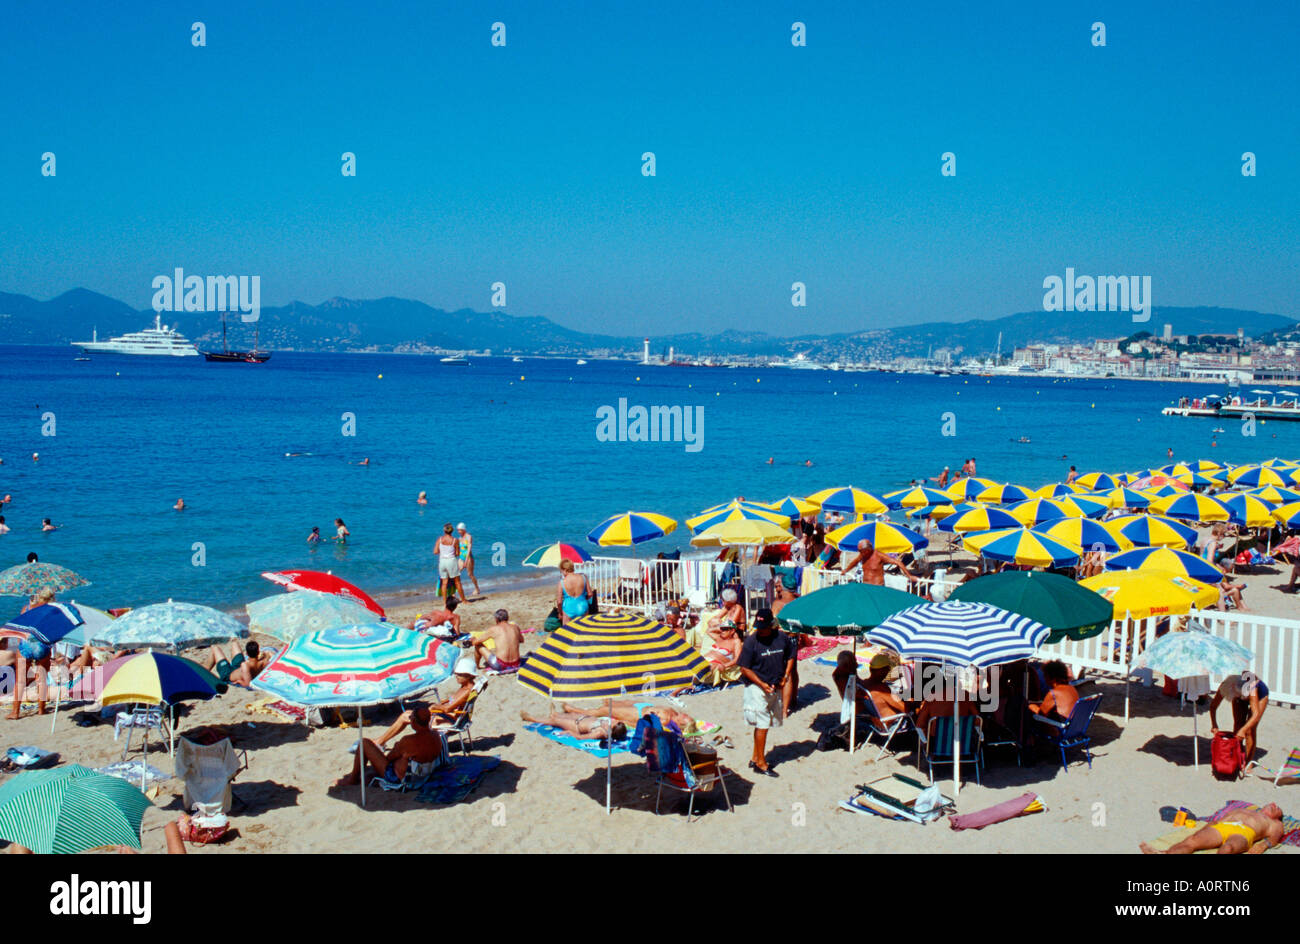 Vacationists at beach / Cannes / Urlauber am Strand Stock Photo